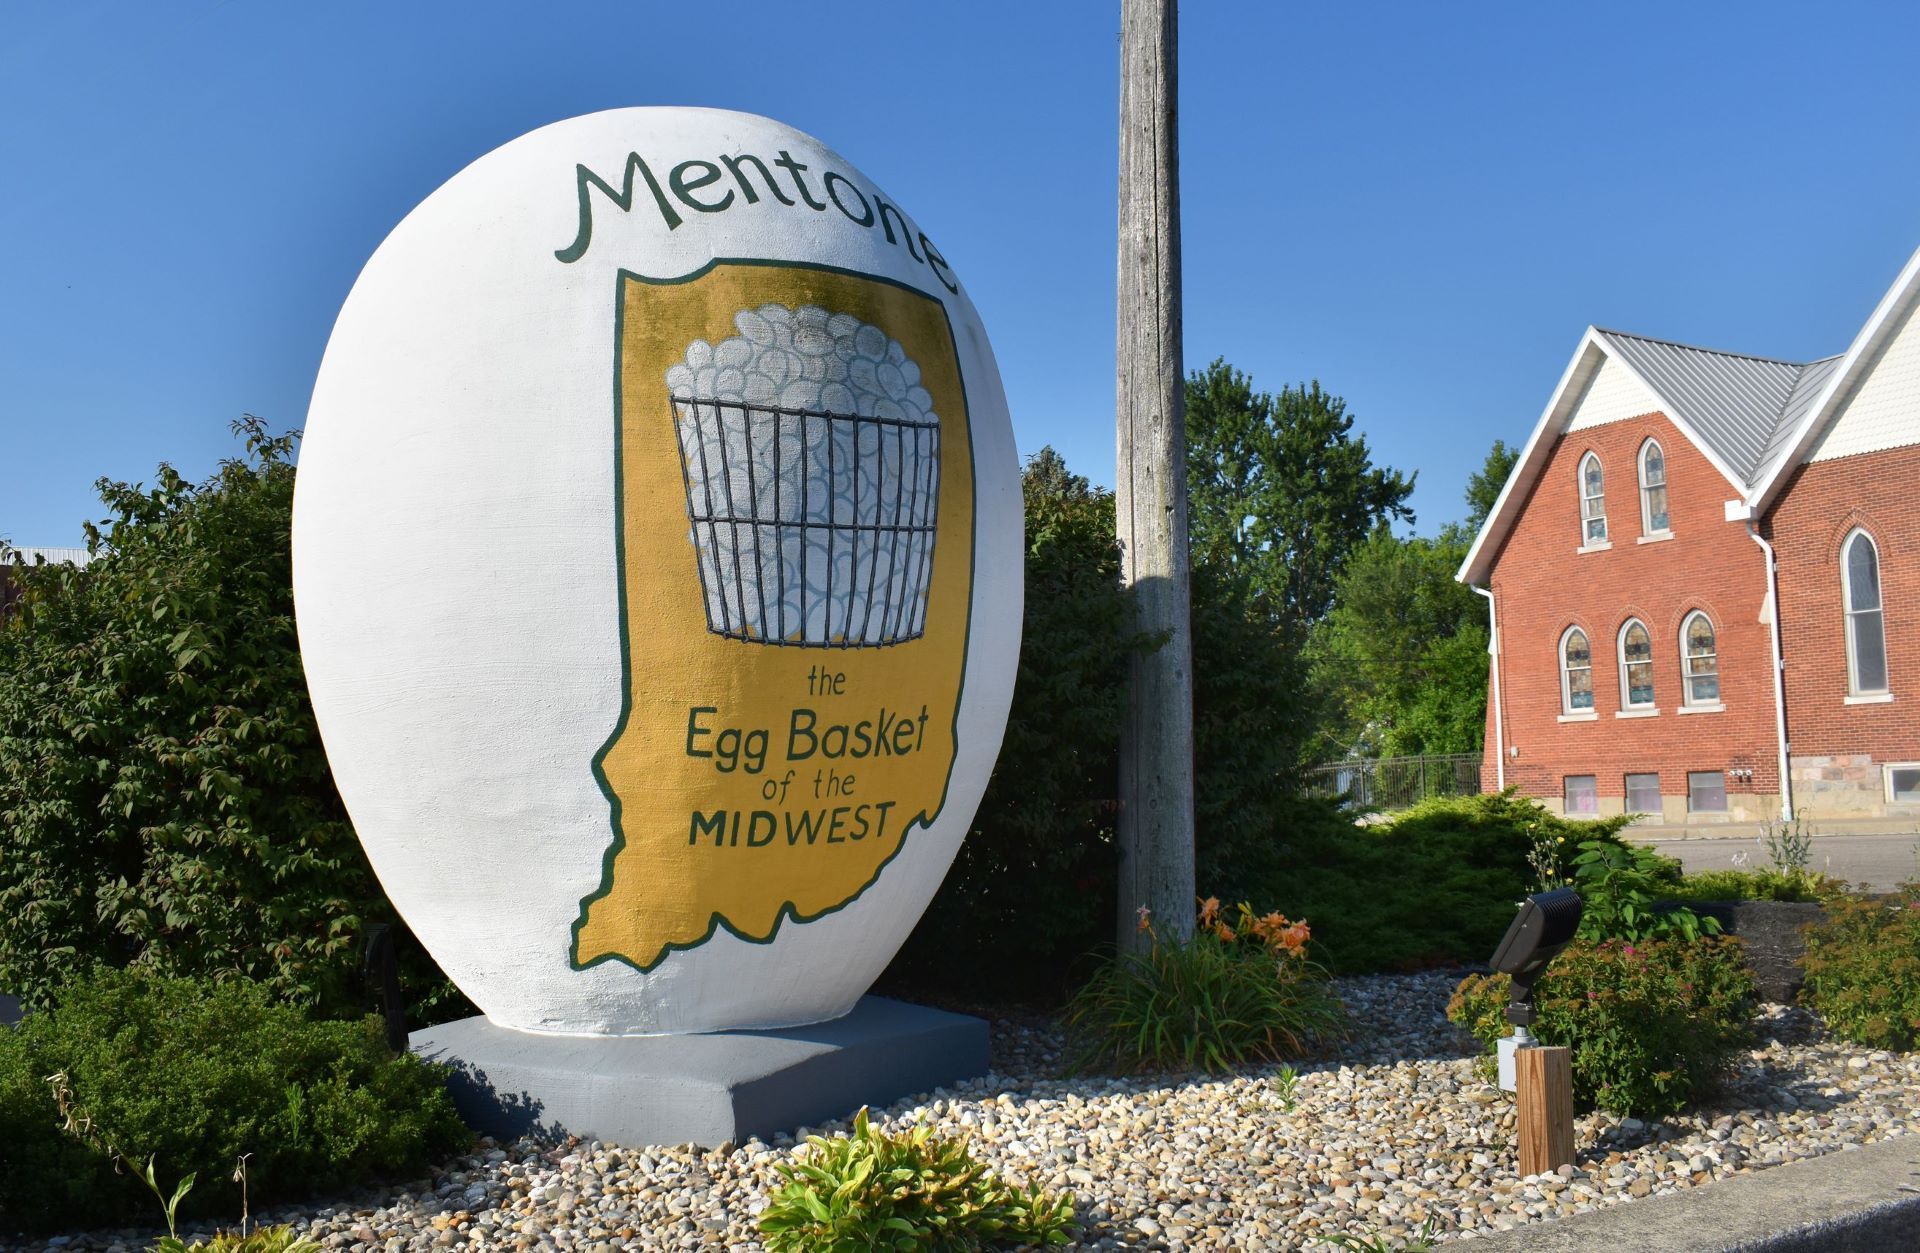 World’s Largest Egg Sculpture: world record in Mentone, Indiana